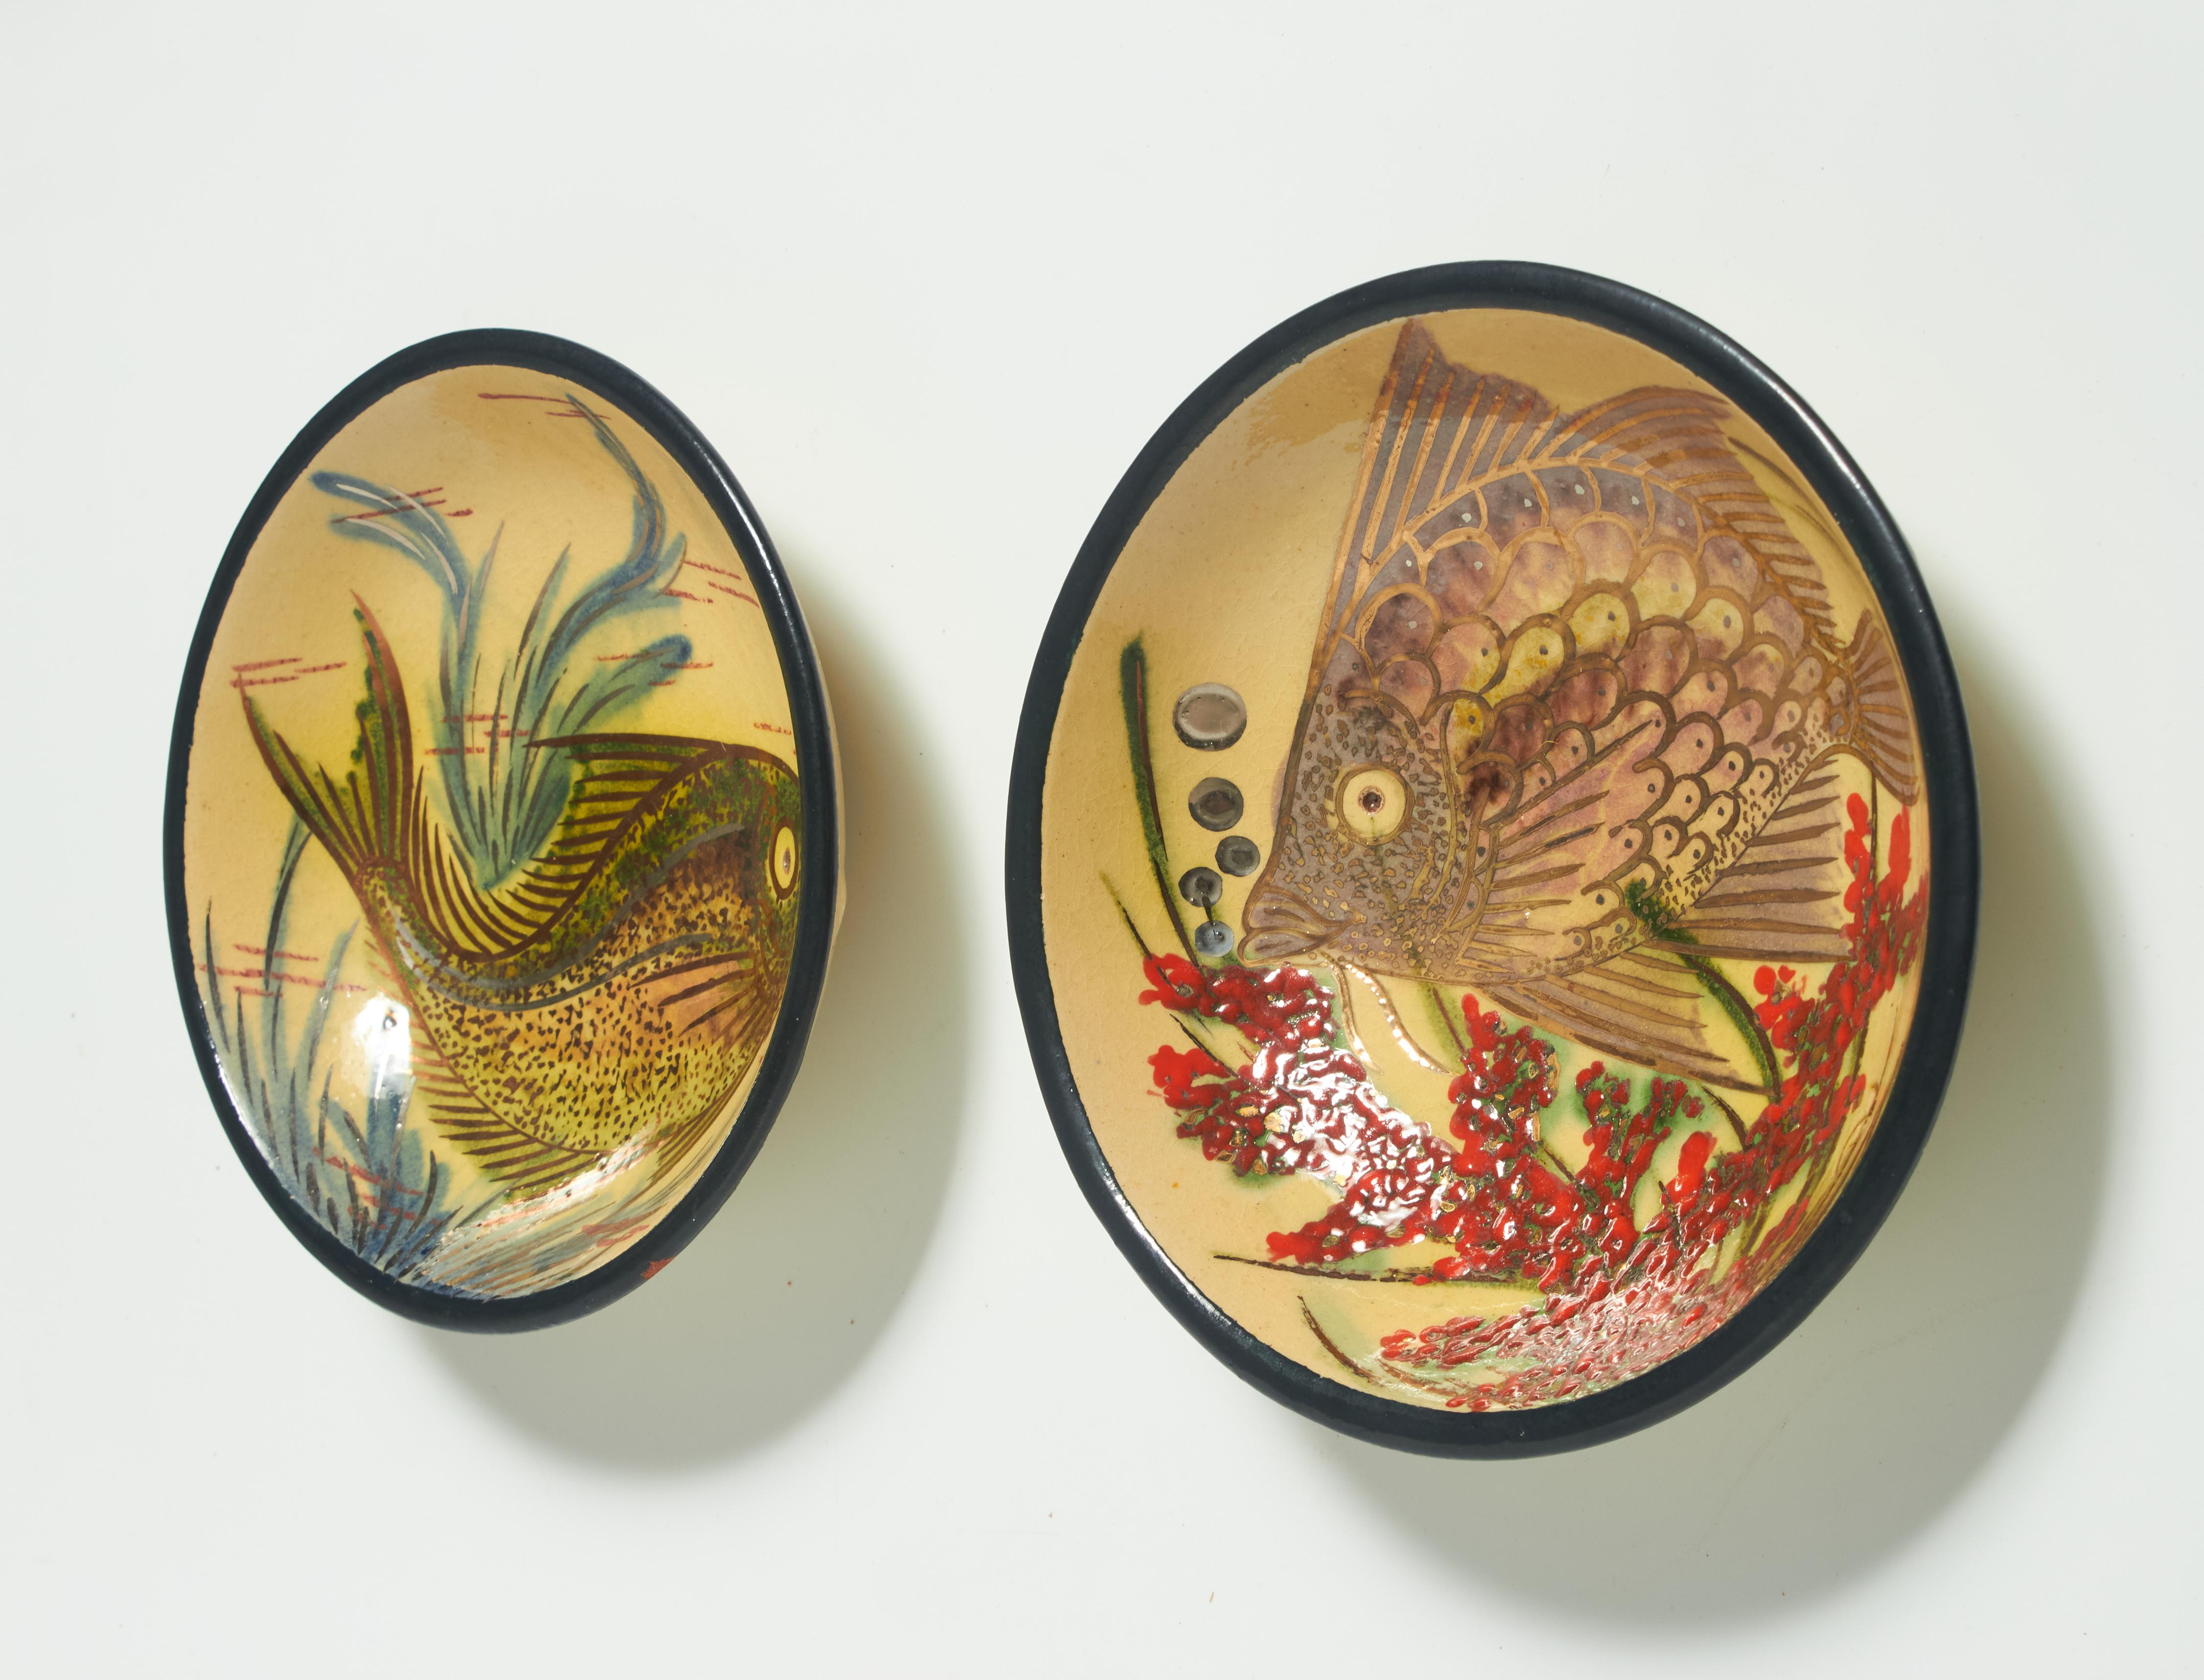 Spanish Pair of Vintage Hand-Painted Ceramic Plates by Catalan Artist Diaz Costa